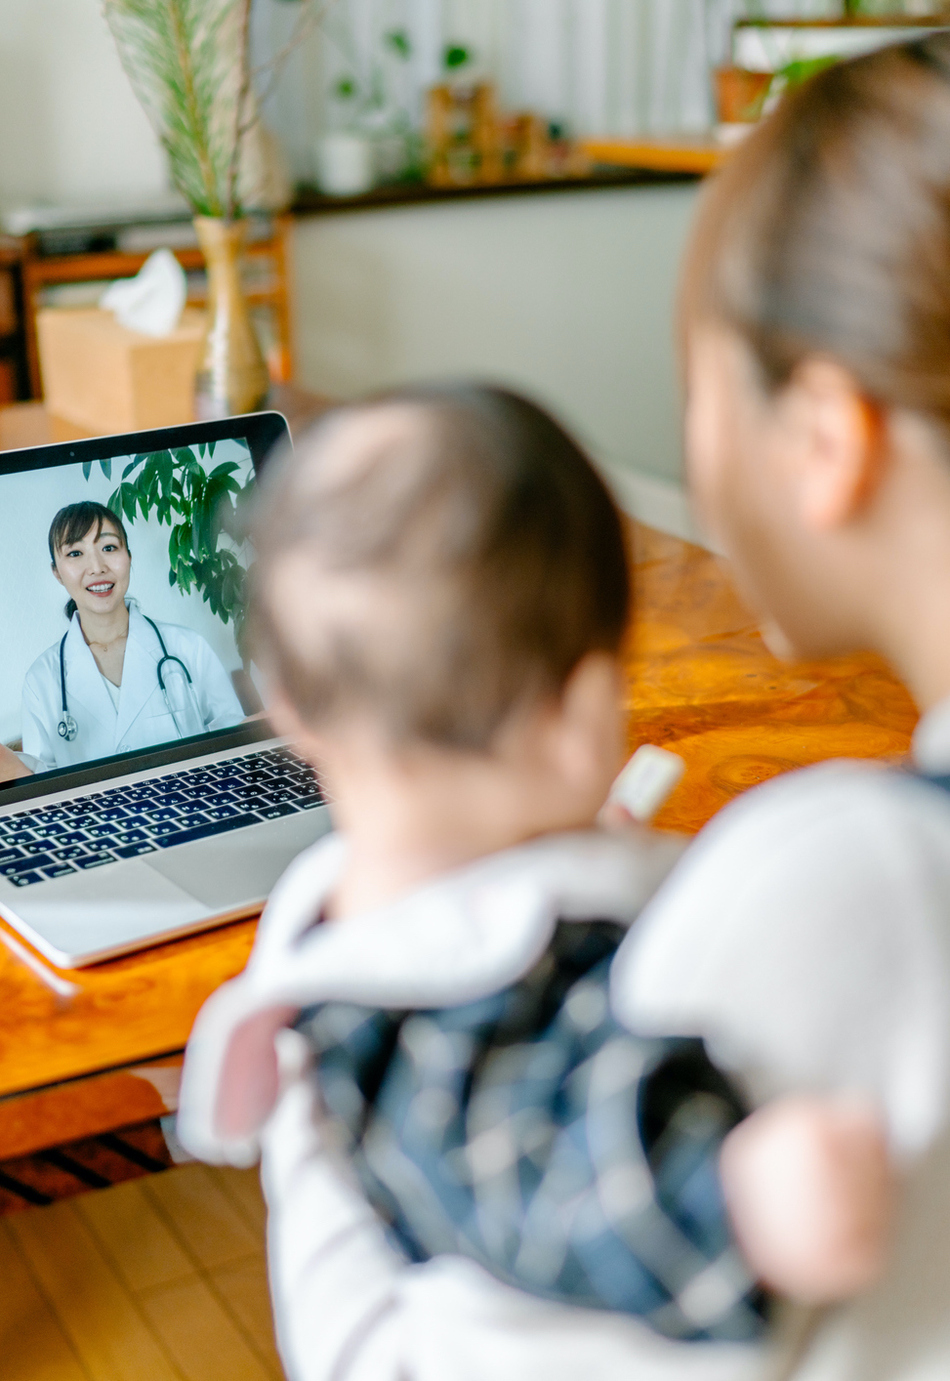 Telehealth or Doctor's Office if My Child is Sick?